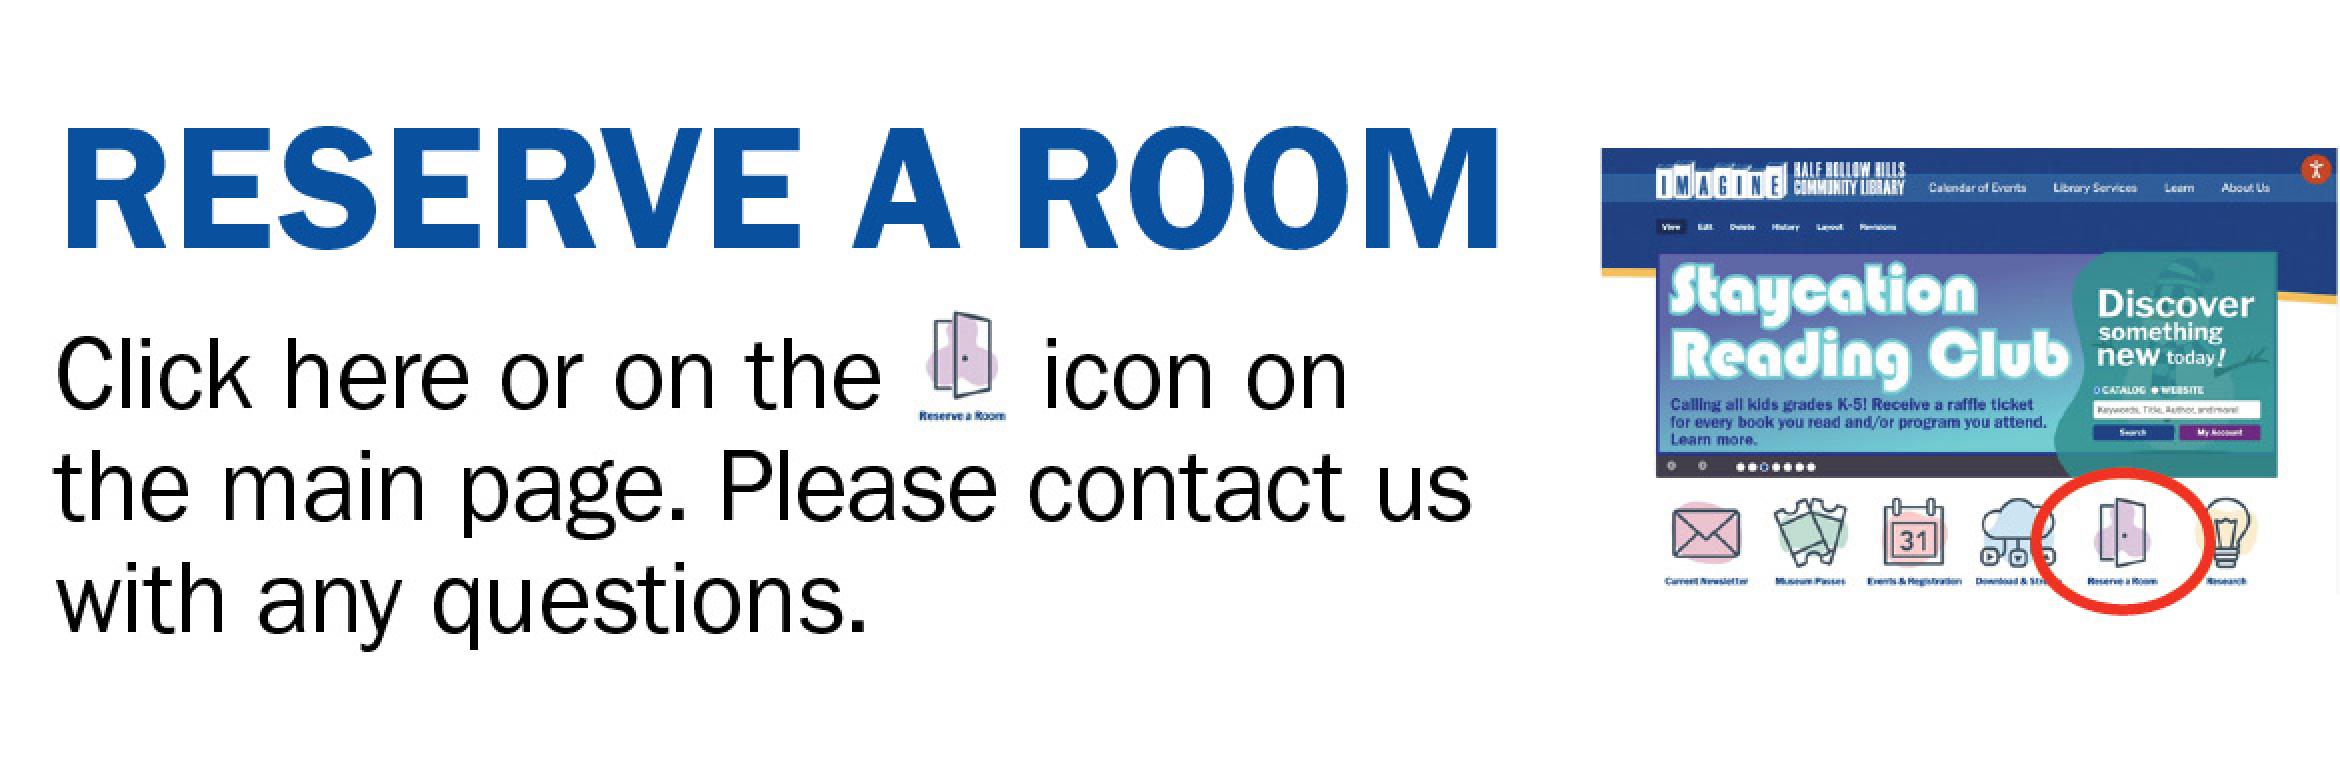 Reserve a room. Click here or on the icon on the main page. Please contact us with any questions.